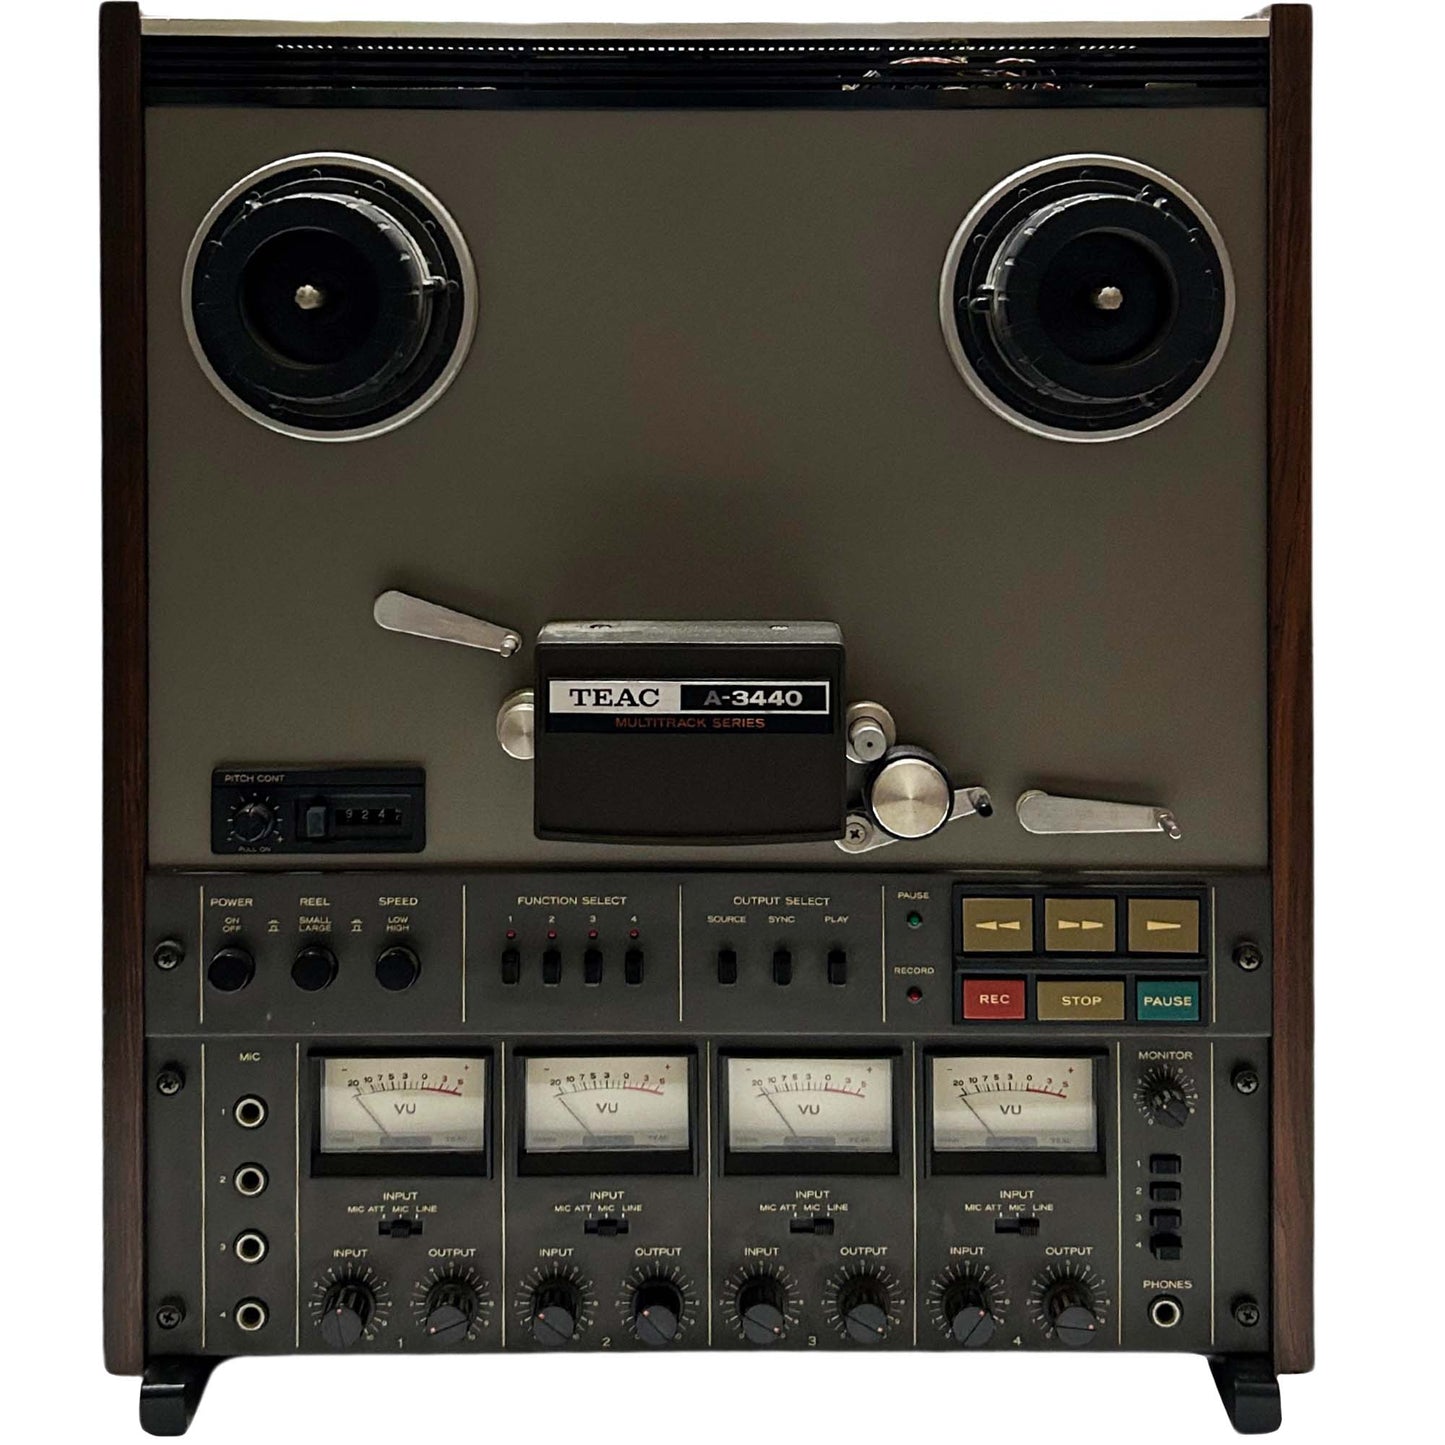 Teac A-3440 Multitrack Tape Deck – Gold & Silver Pawn Shop